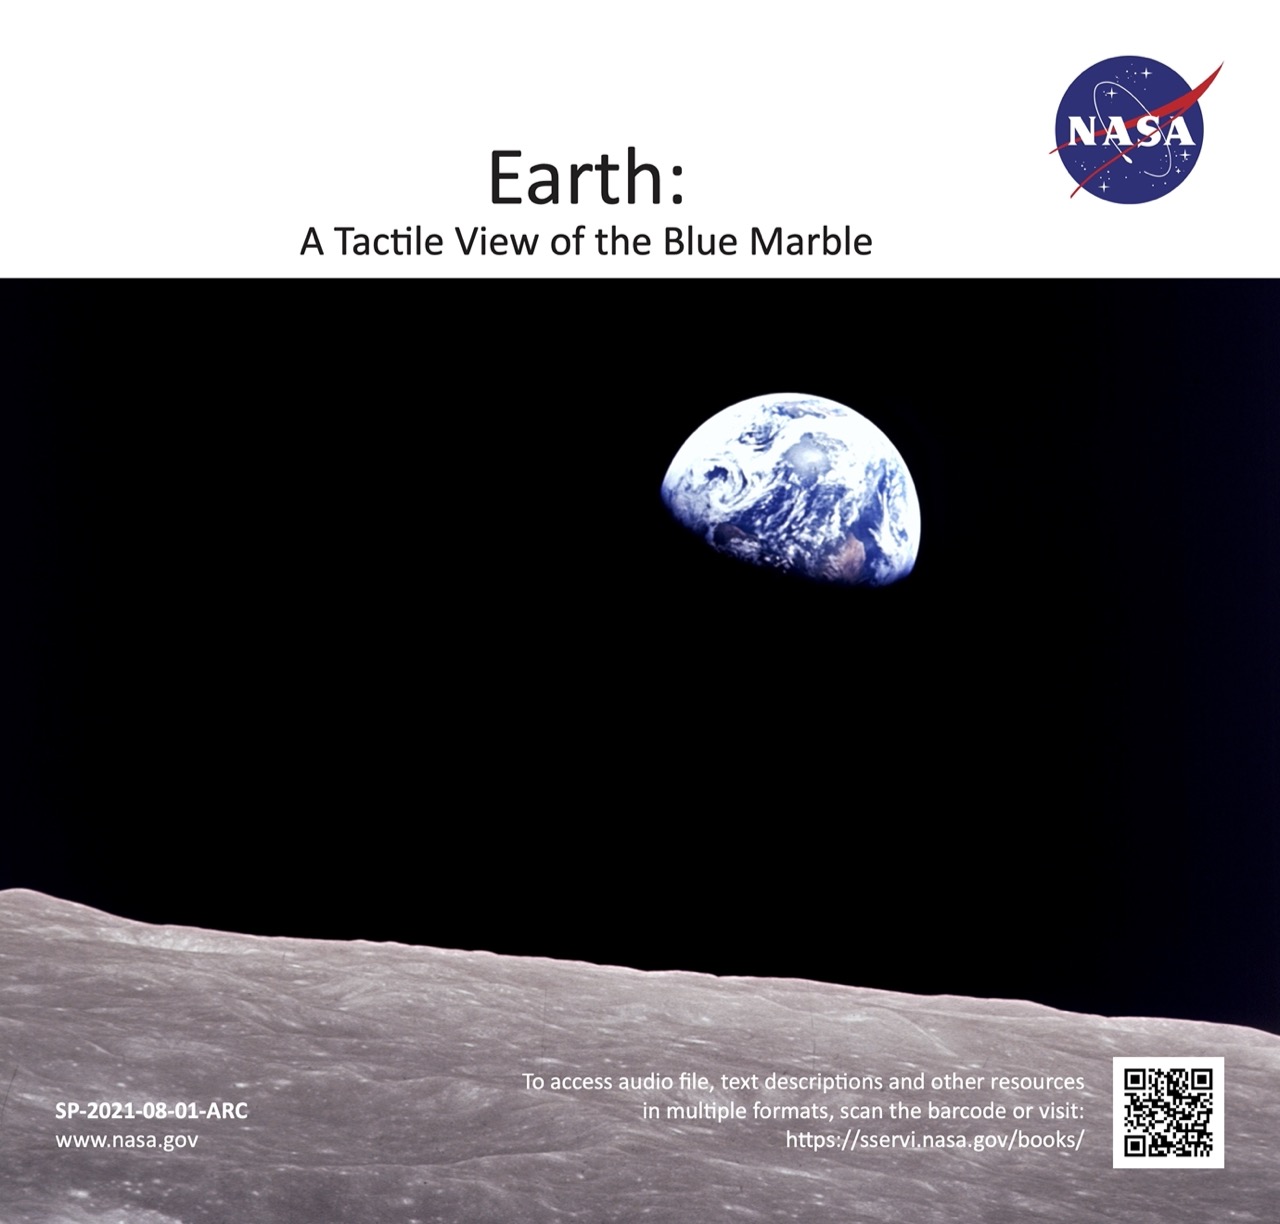 The cover image for the Earth: A Tactile View of the Blue Marble